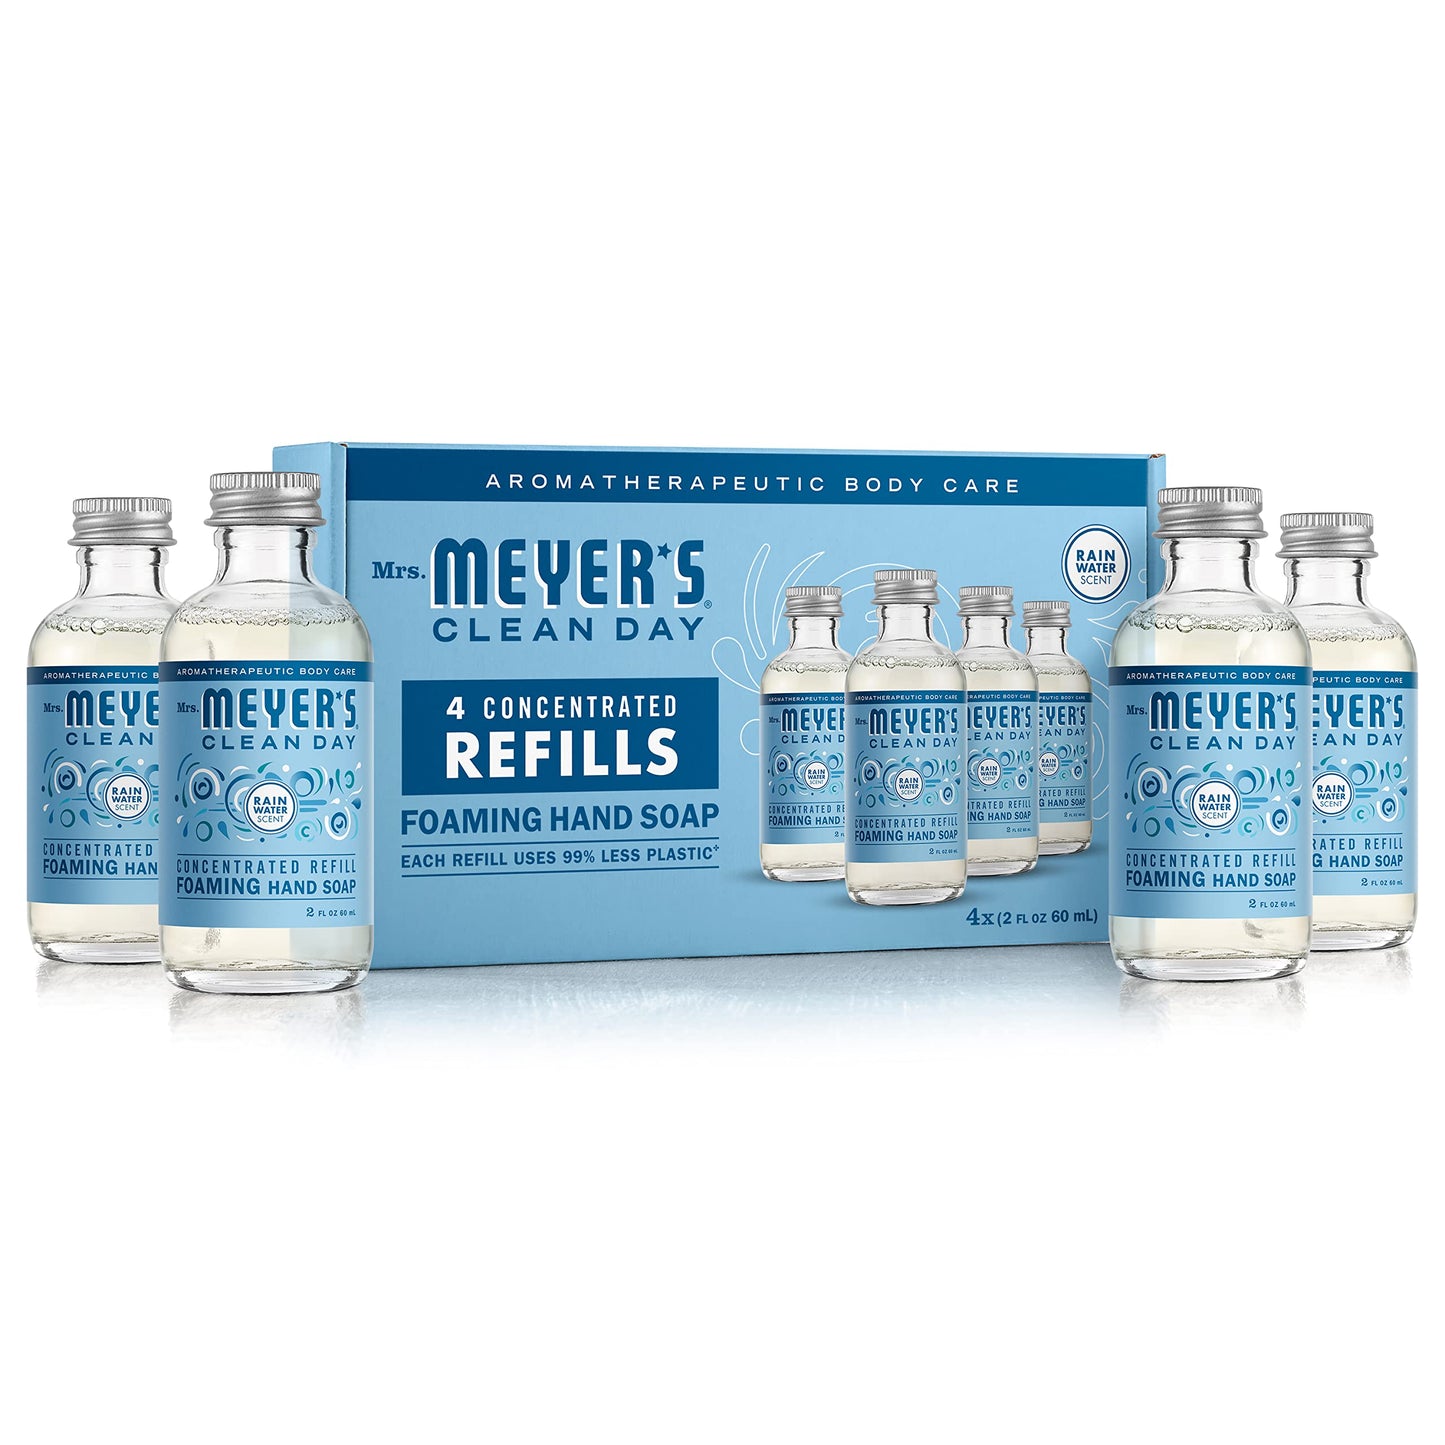 Mrs Meyer's: Hand Soap Concentrated Refills